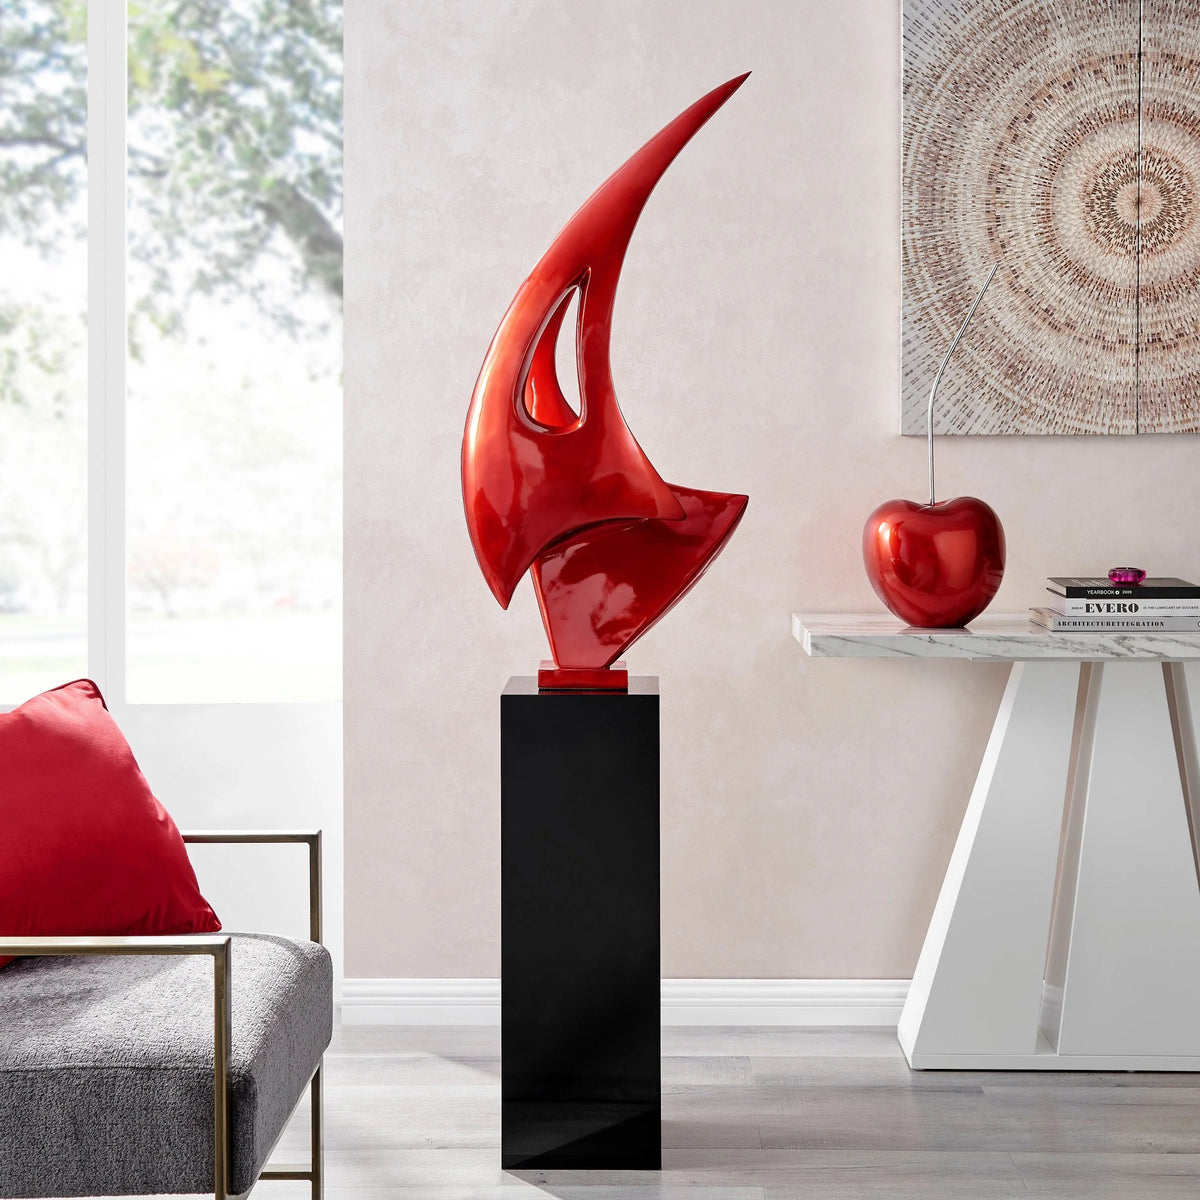 Metallic Red Sail Floor Sculpture With Black Stand 70 Inch Tall